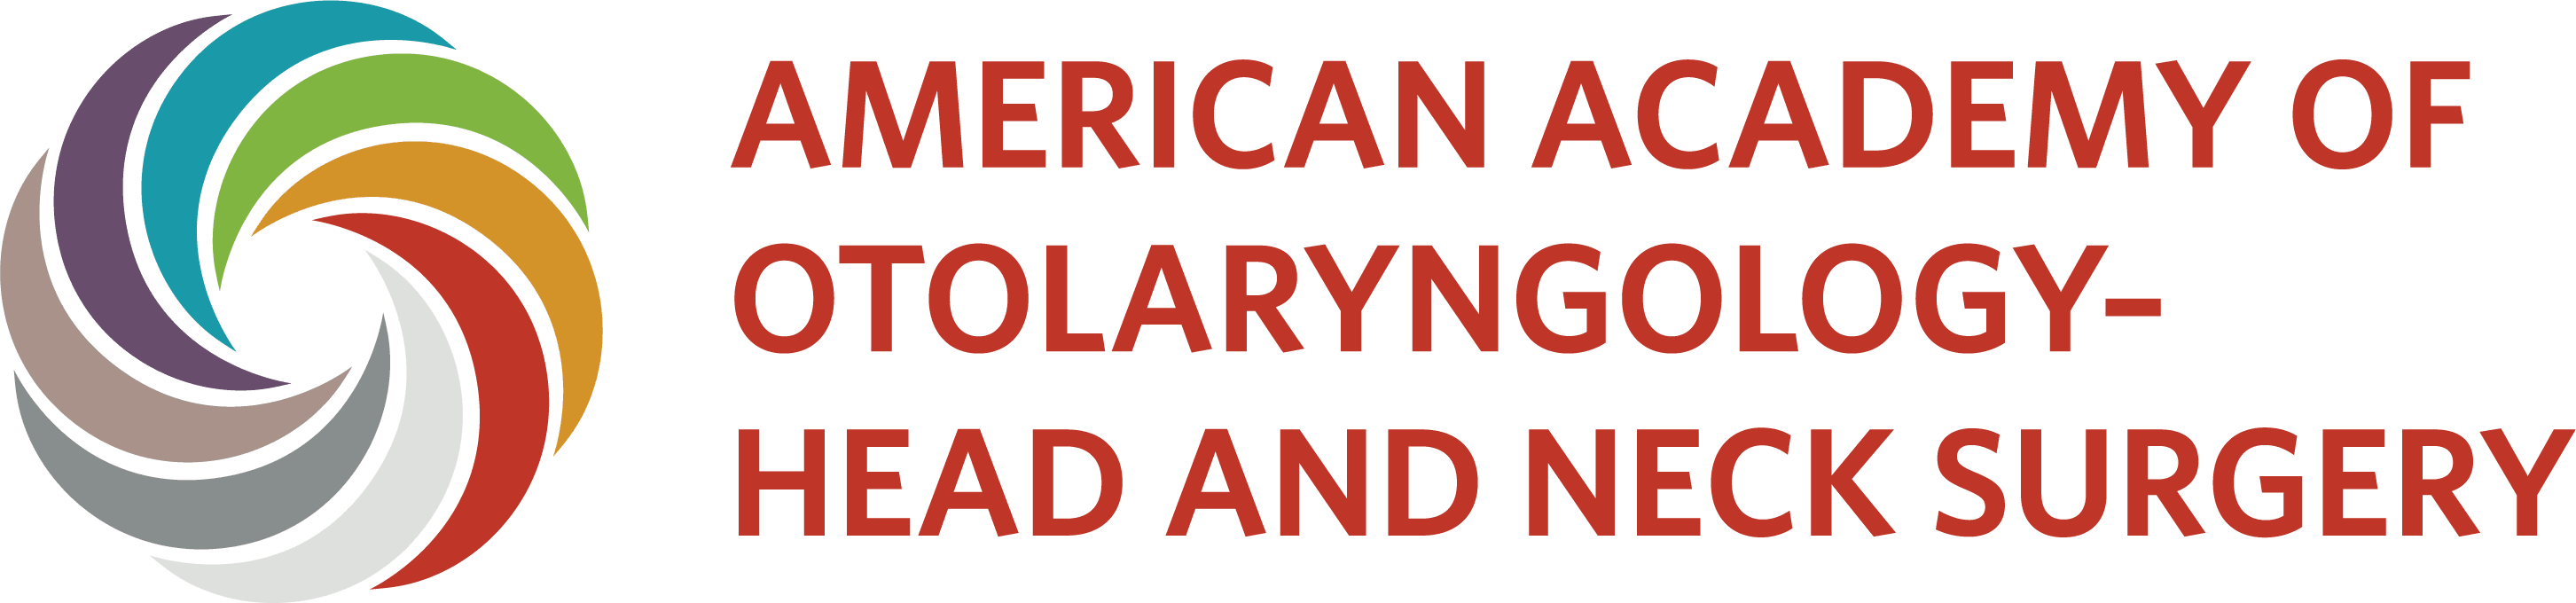 The American Academy of Otolaryngology – Head and Neck Surgery